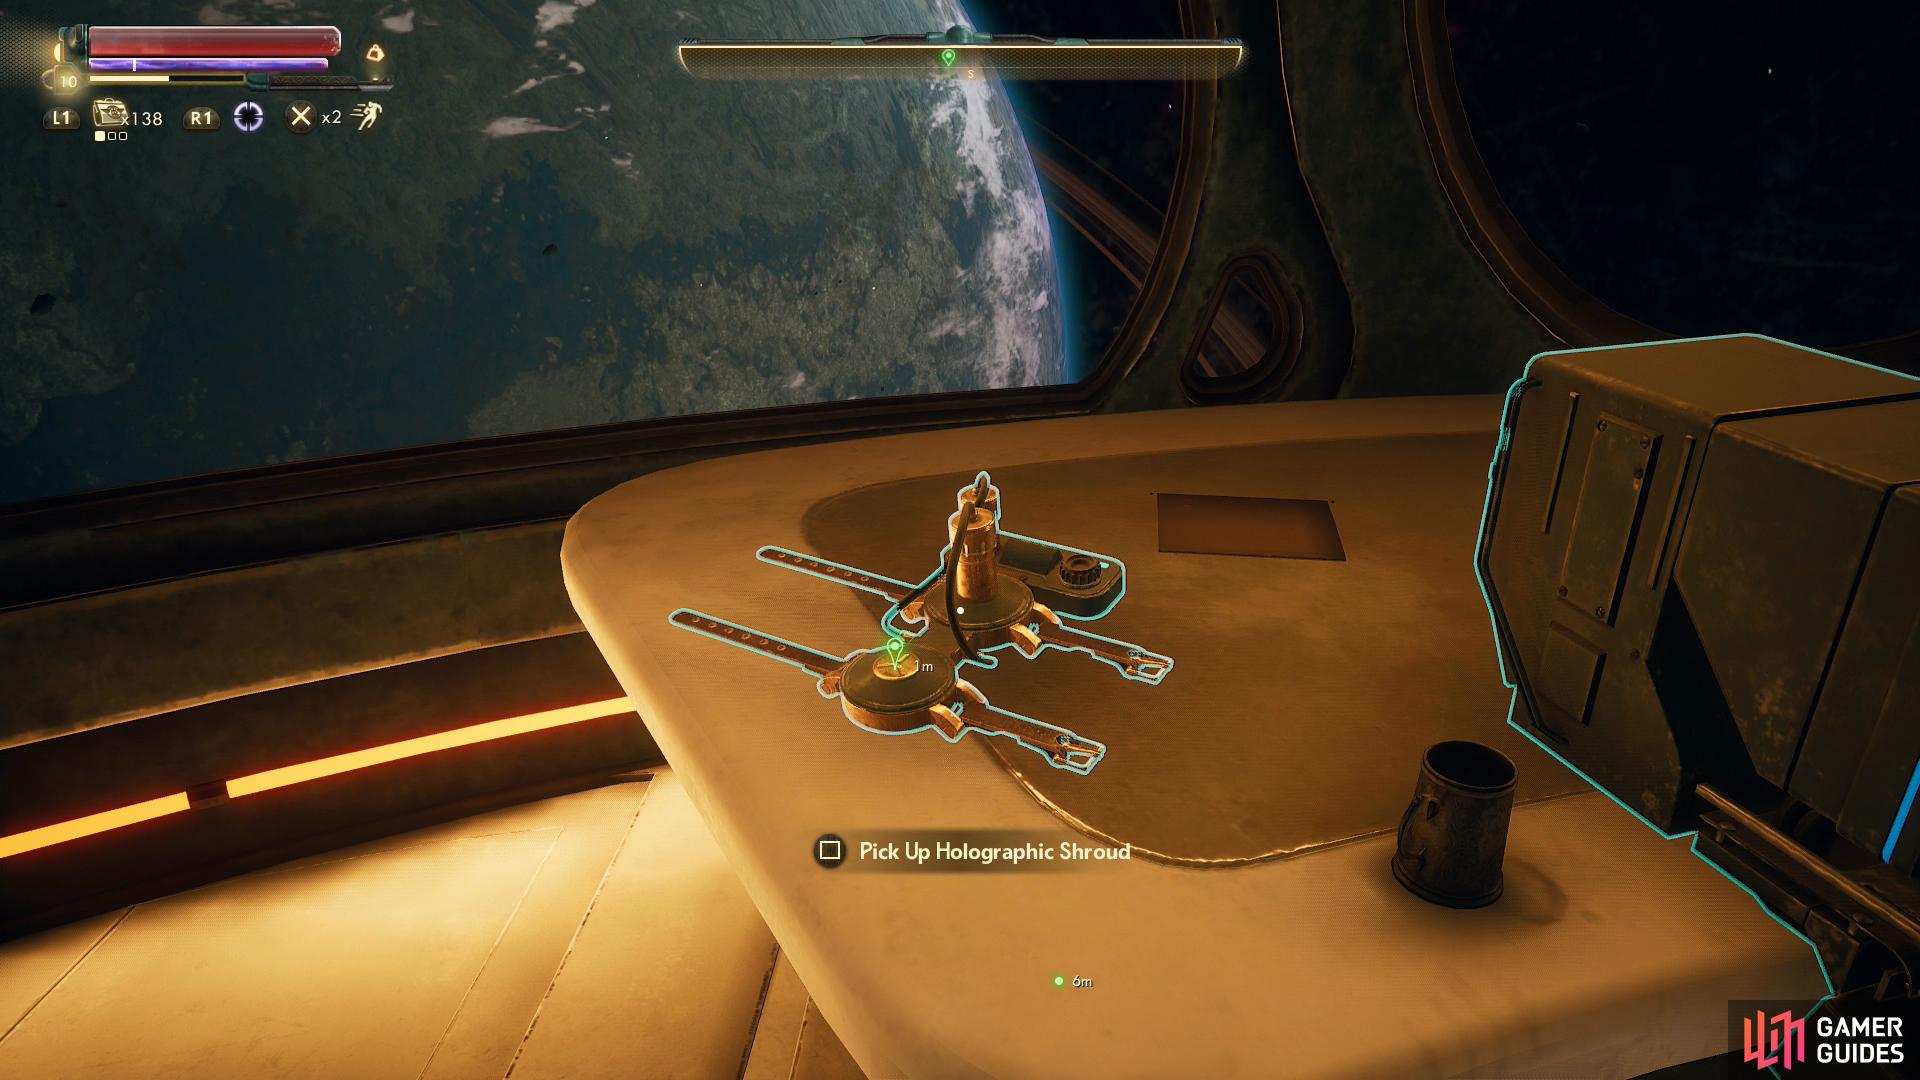 Pick up the Holographic Shroud from the captain's quarters.